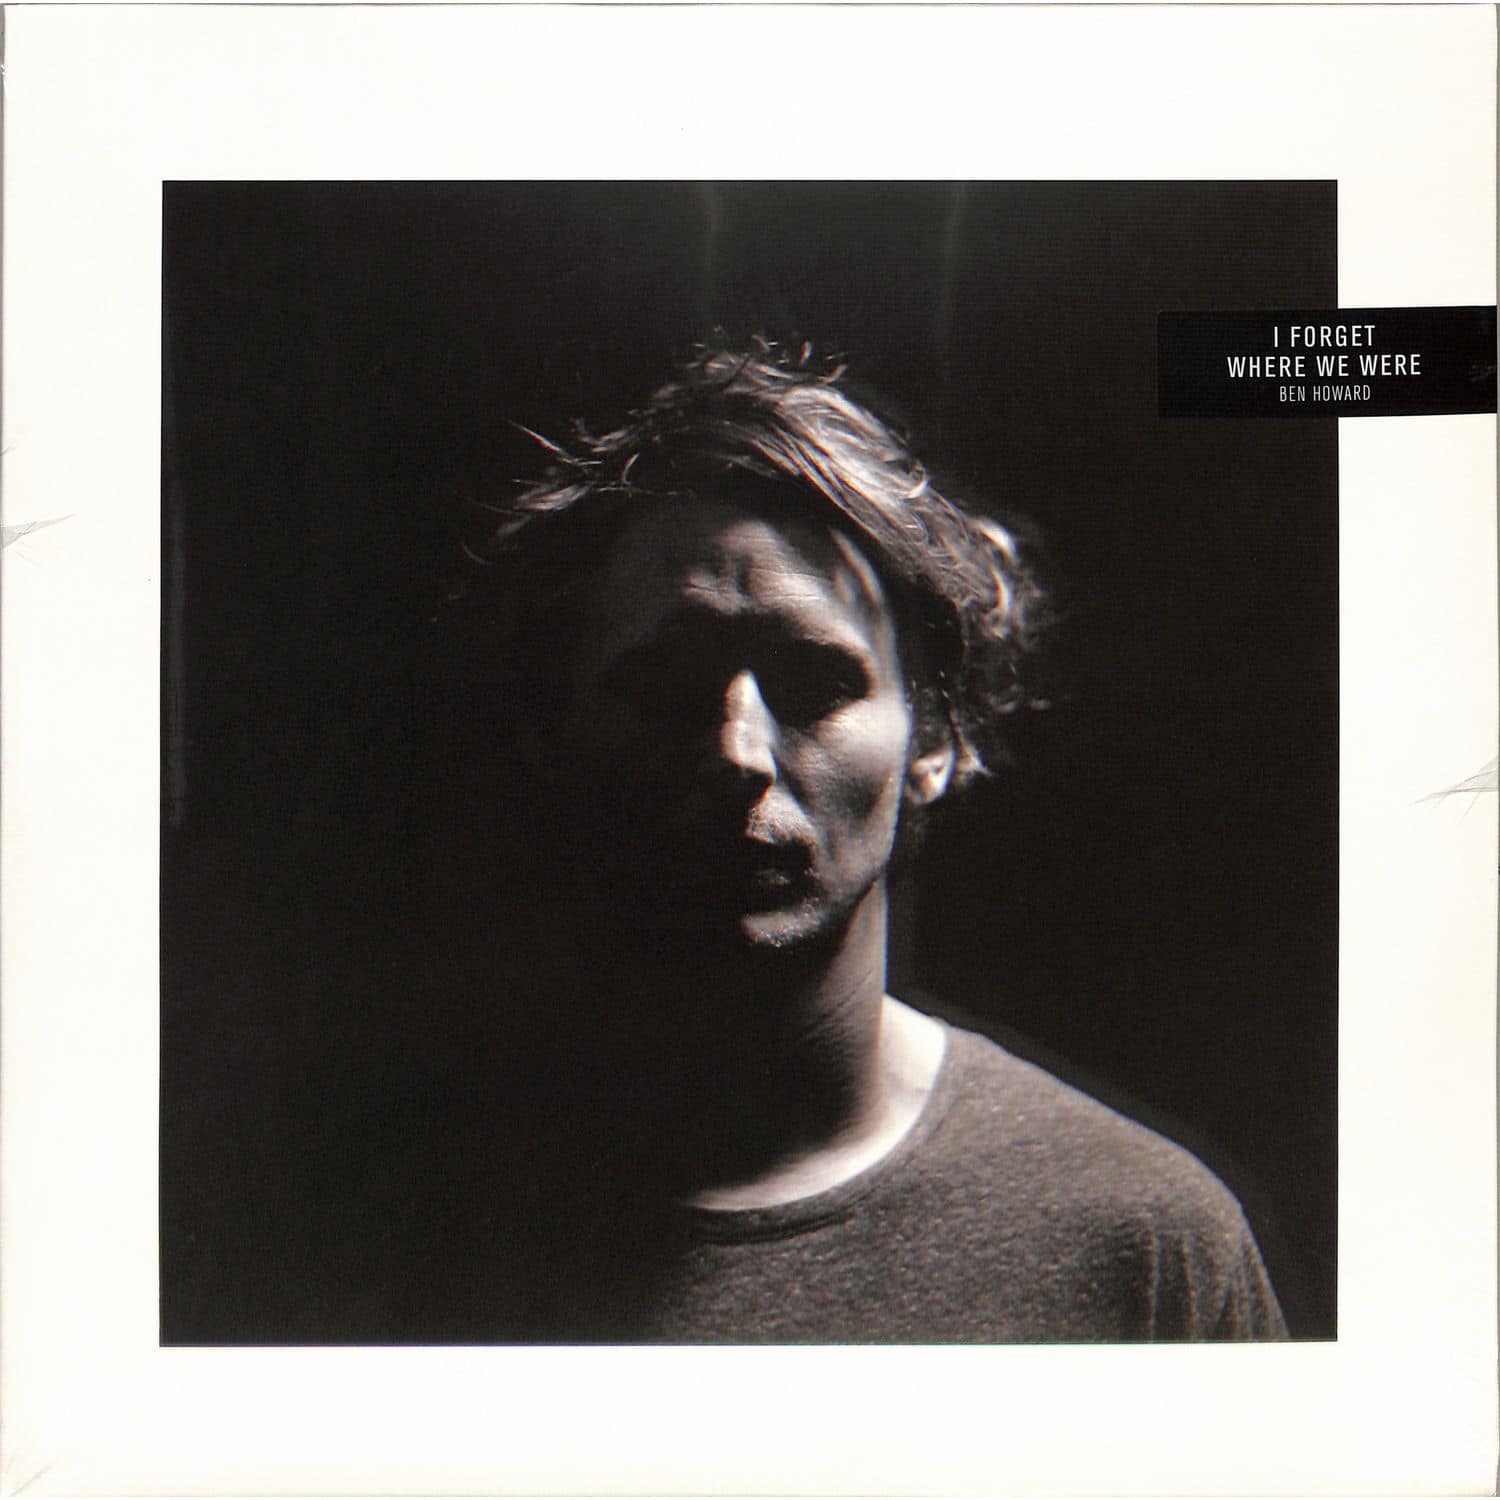 Ben Howard - I FORGET WHERE WE WERE 